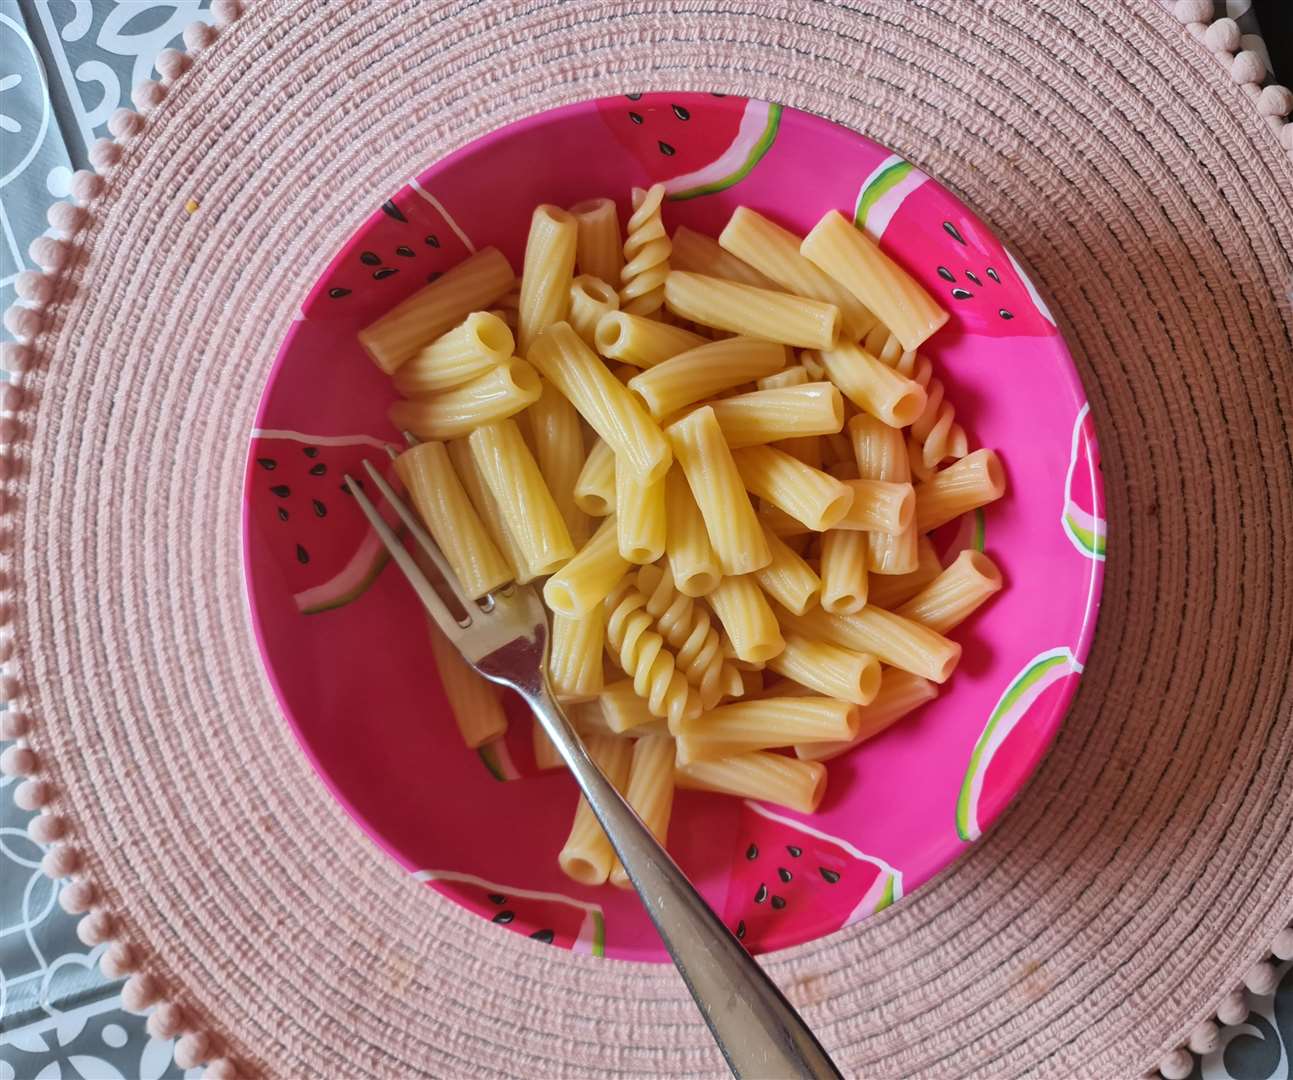 A bowl of pasta